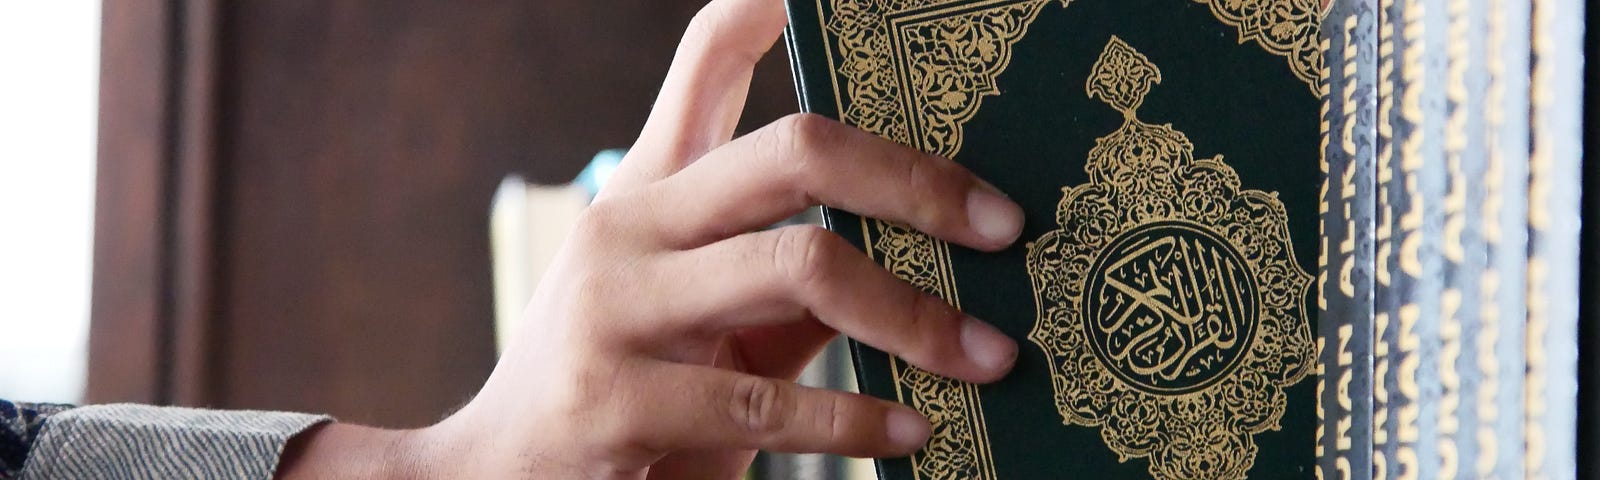 An image of somebody returning a copy of the Quran to a row of books.